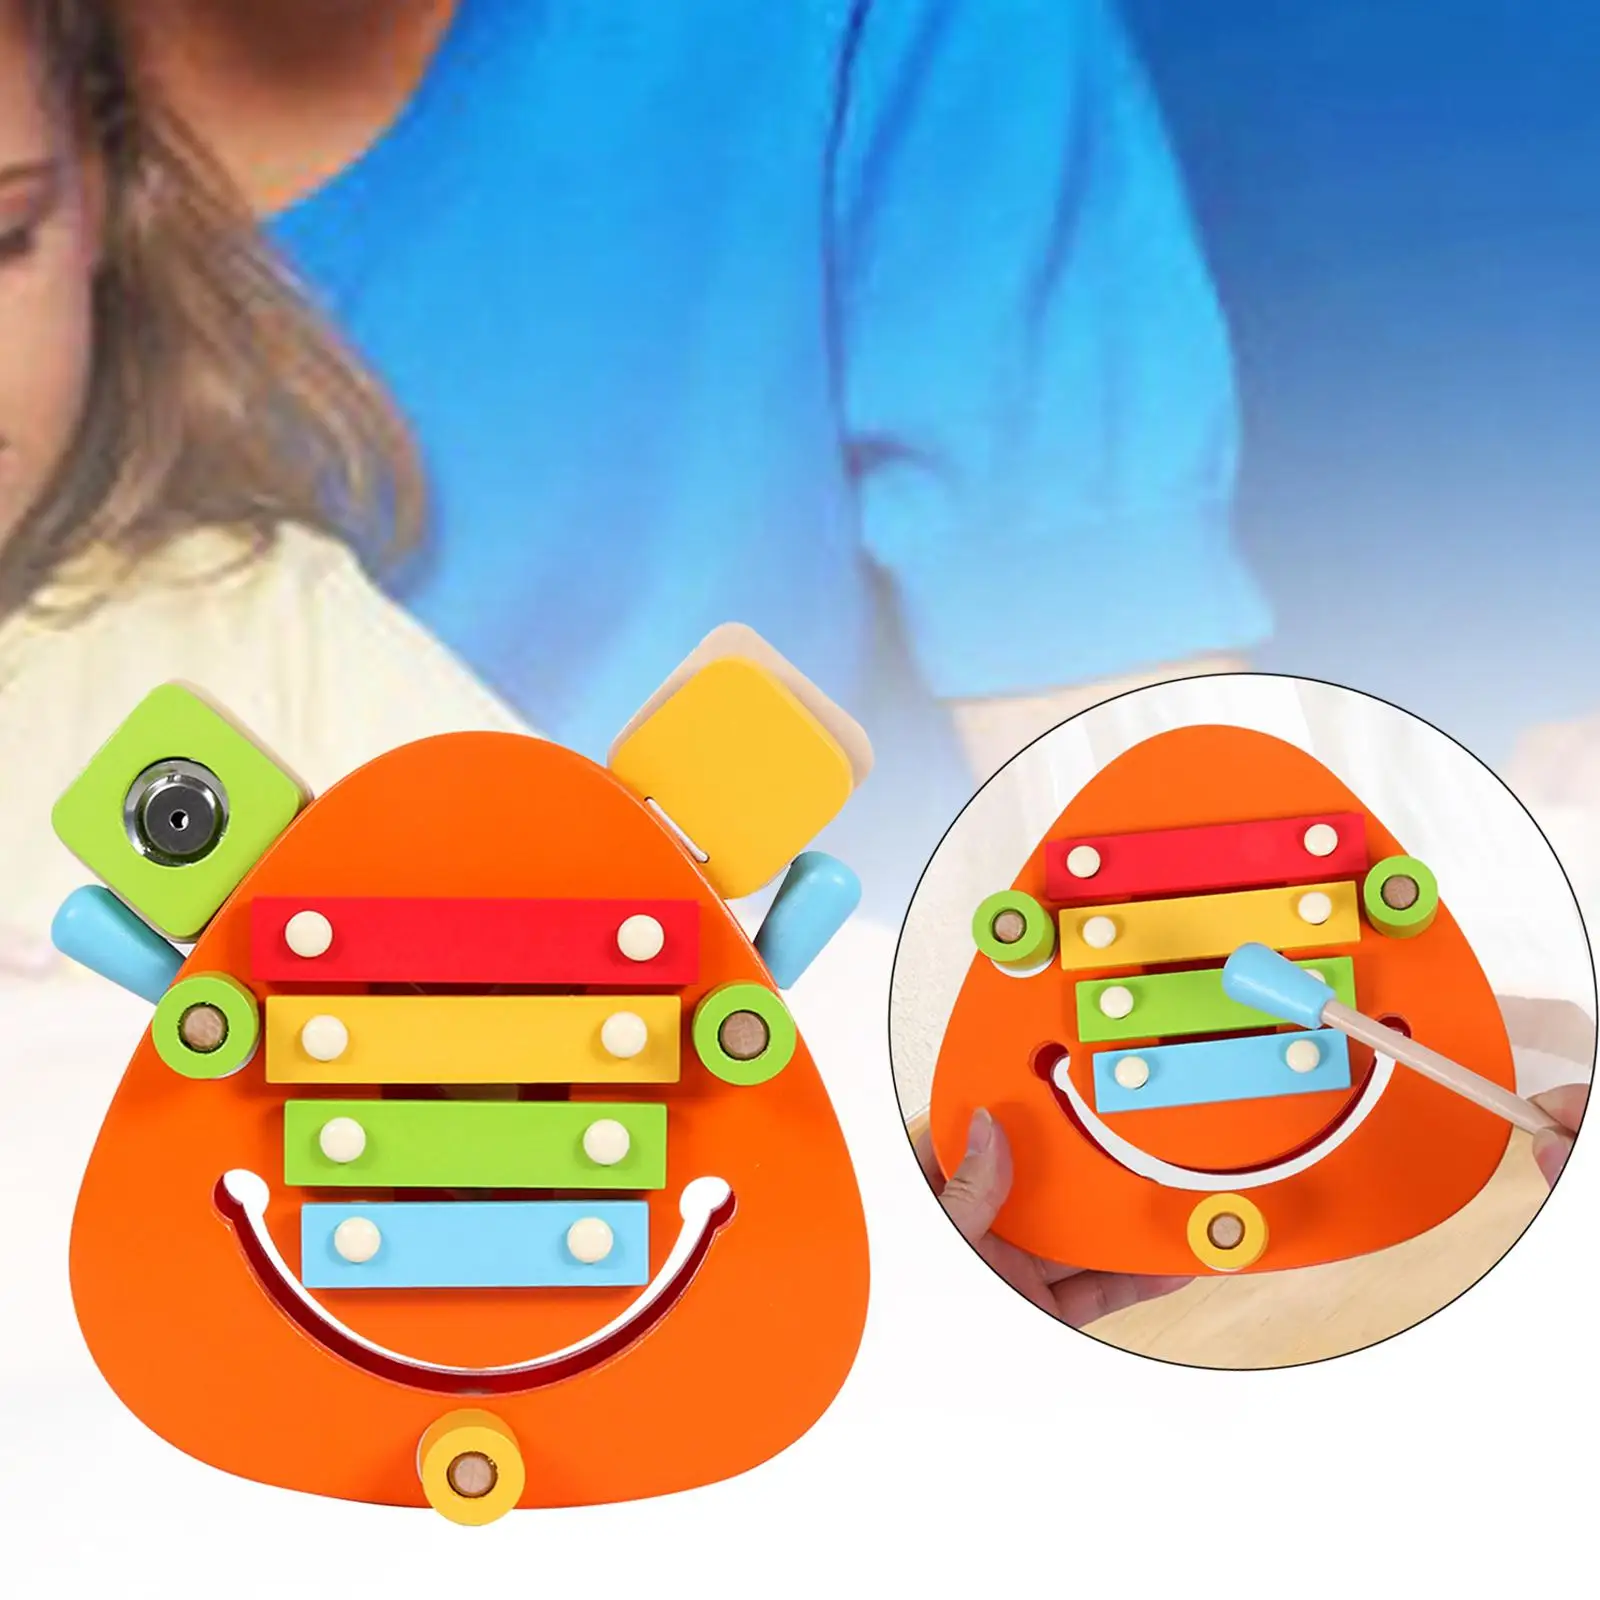 Multipurpose Educational Learning Set Montessori Toy Percussion Instrument for